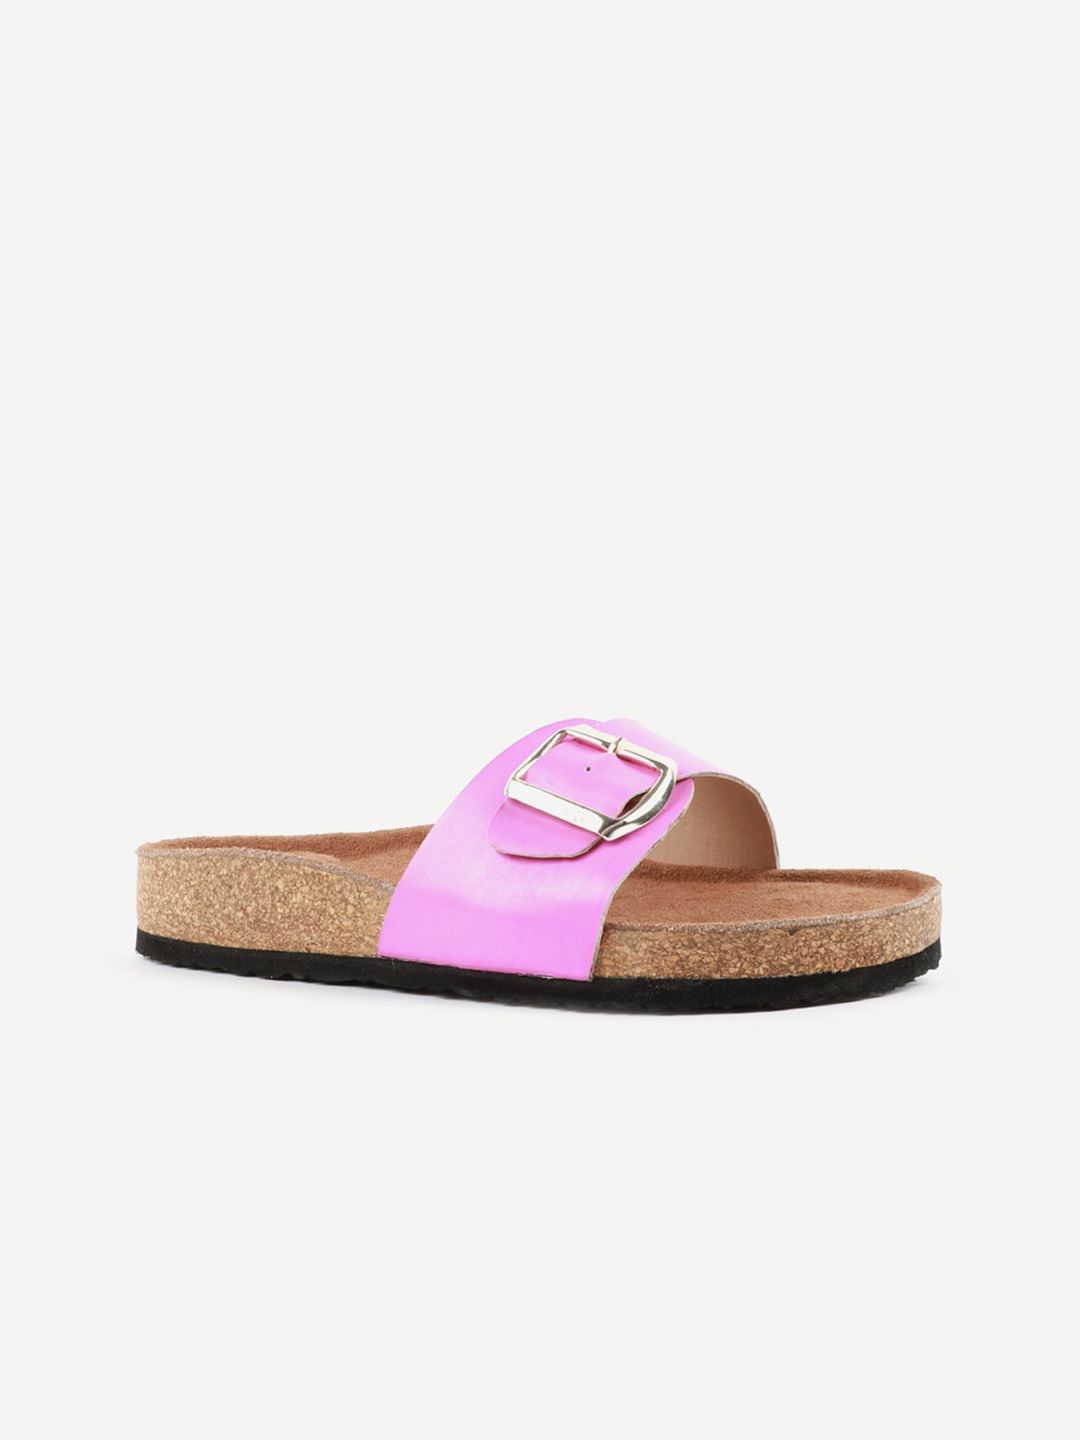 Carlton London Women Pink Open Toe Flats with Buckles Price in India